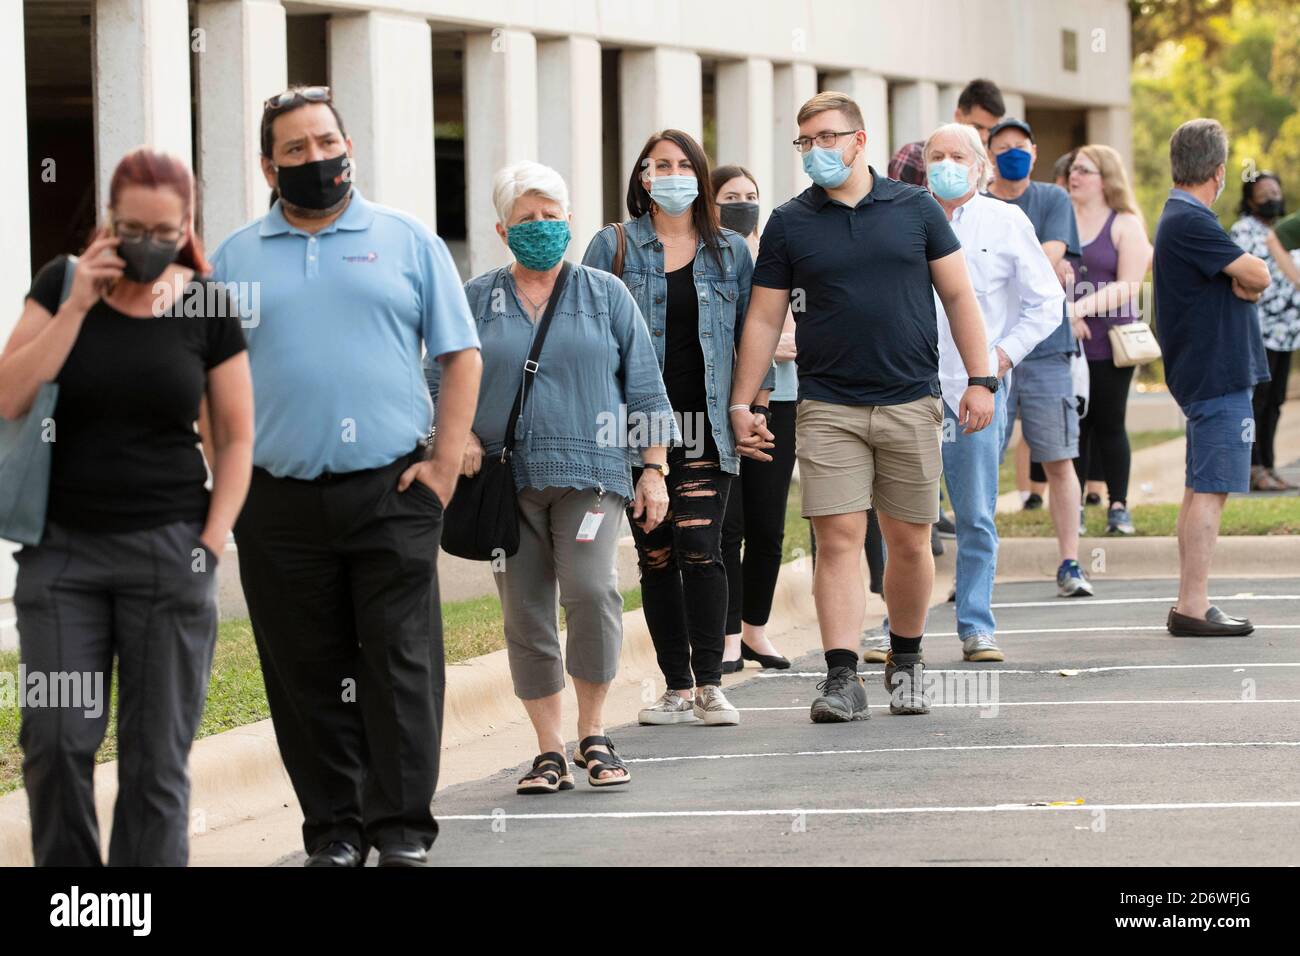 Austin, Texas USA, Oct. 13 2020: Masked-up Texans wait patiently in line at the Arboretum area of north Austin at an early voting site to cast ballots in the 2020 presidential election. Officials are reporting record numbers of early voters with almost 40,000 per day citywide. Stock Photo